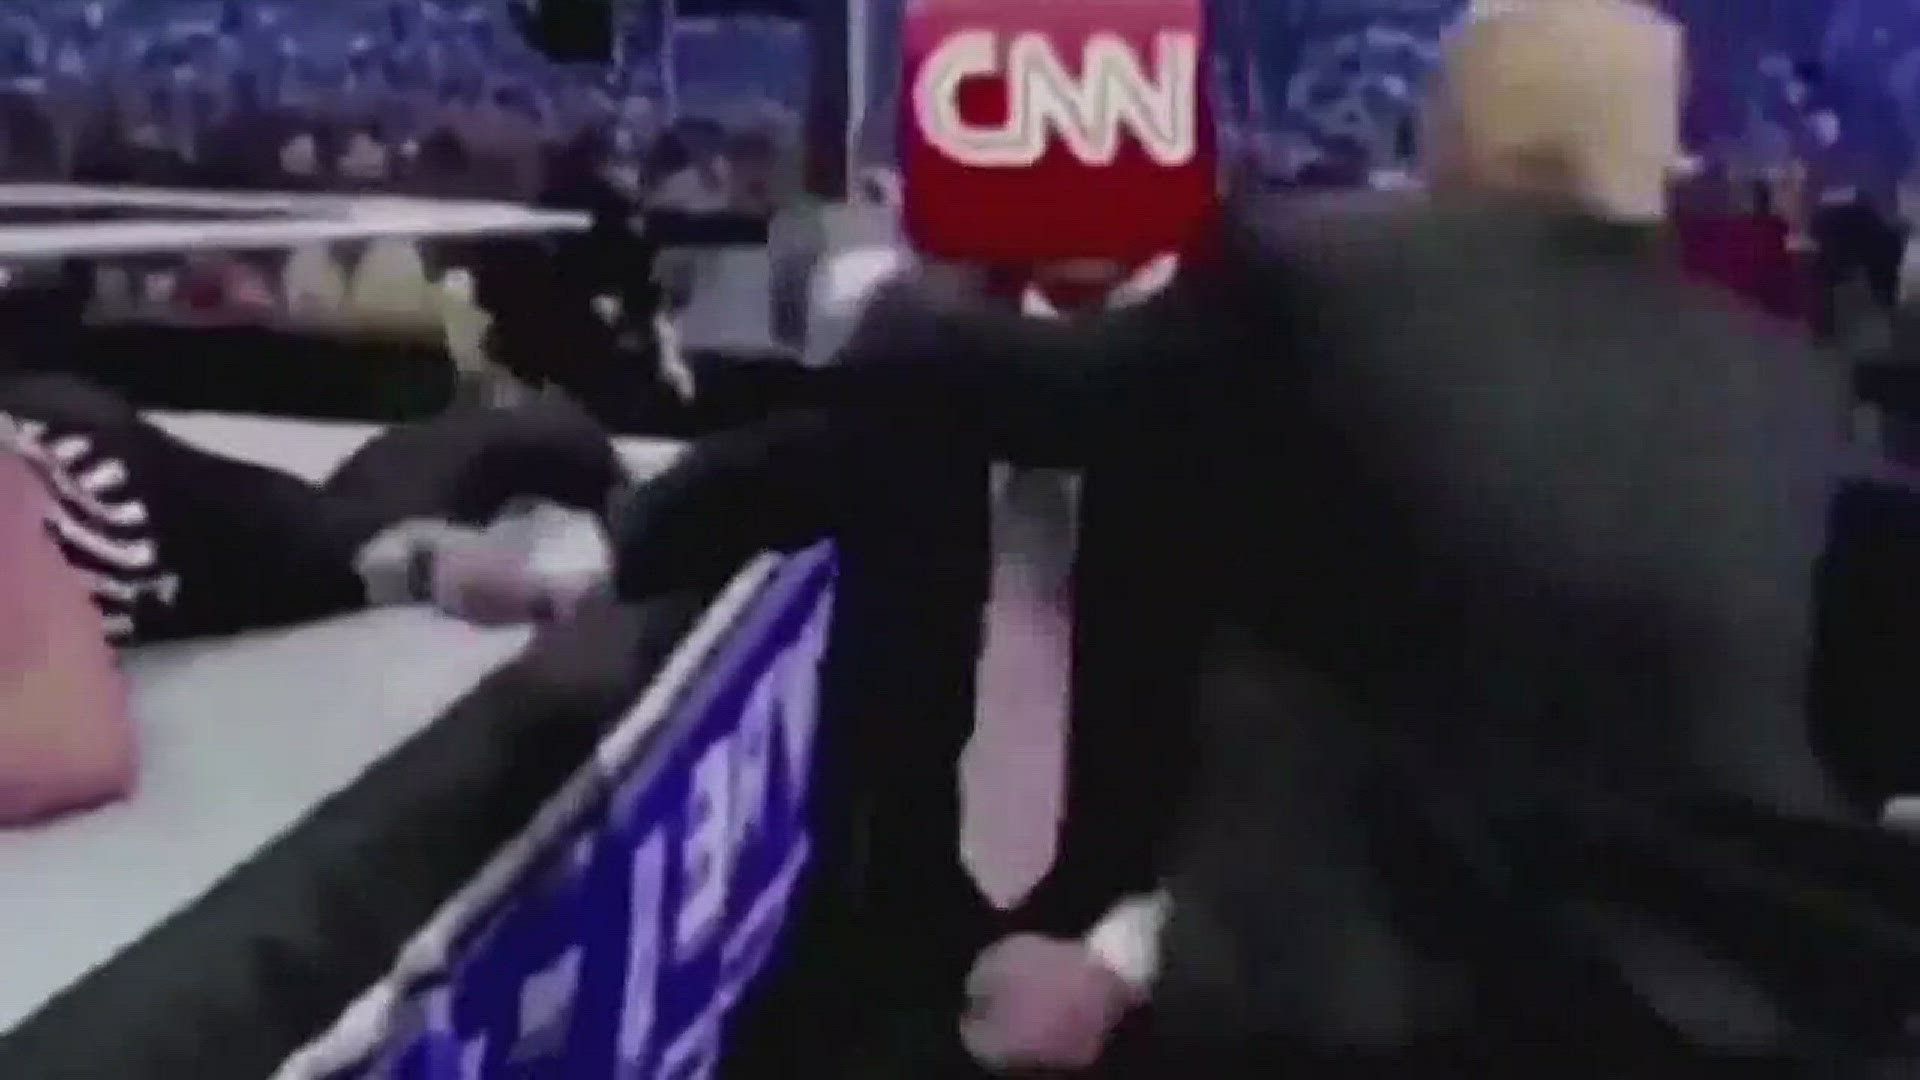 CNN grapples with Trump's wrestling video